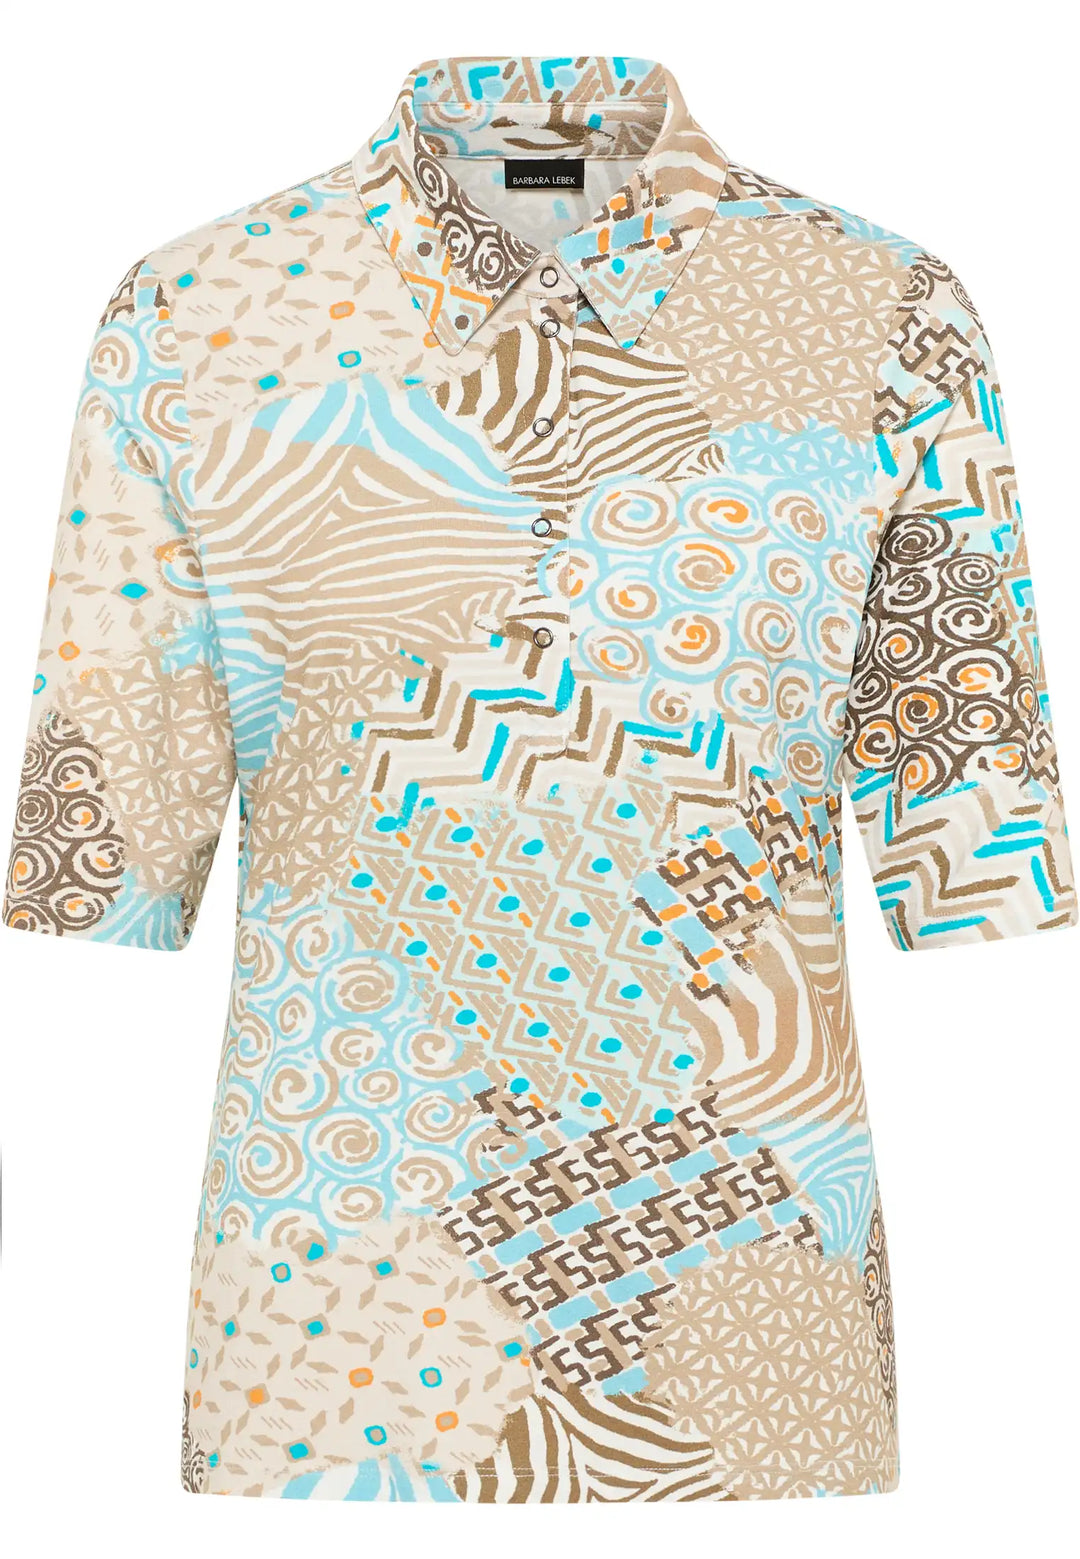 Short-sleeved polo shirt with beige, blue, and brown abstract tribal pattern and classic collar, style 61540042-220